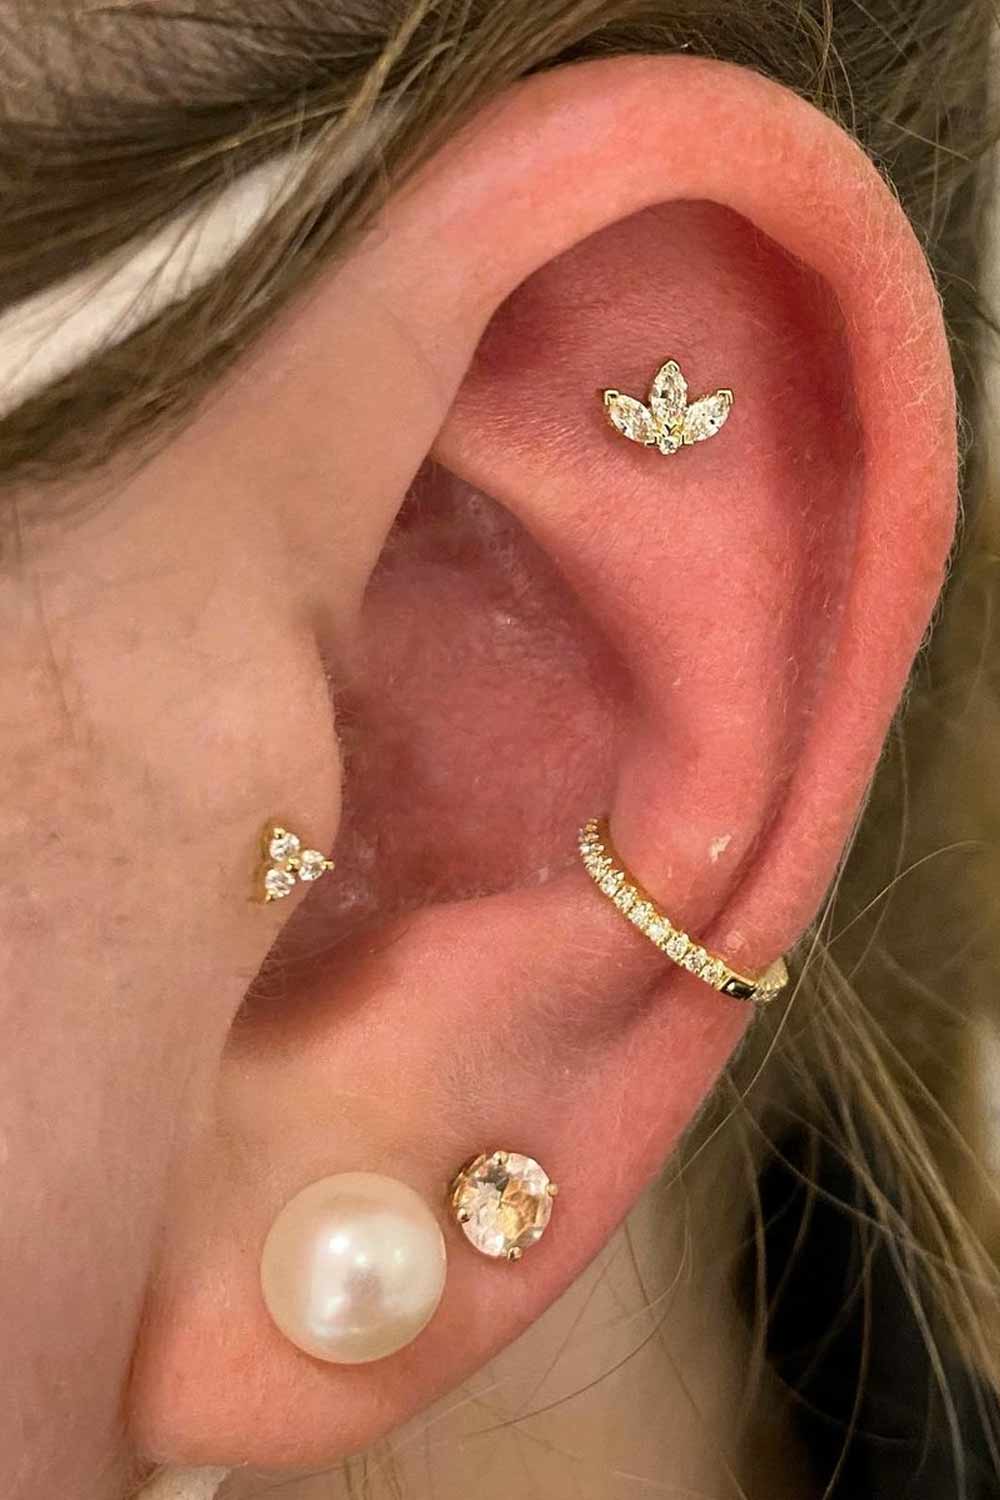 Jewelry Types for Different Piercings